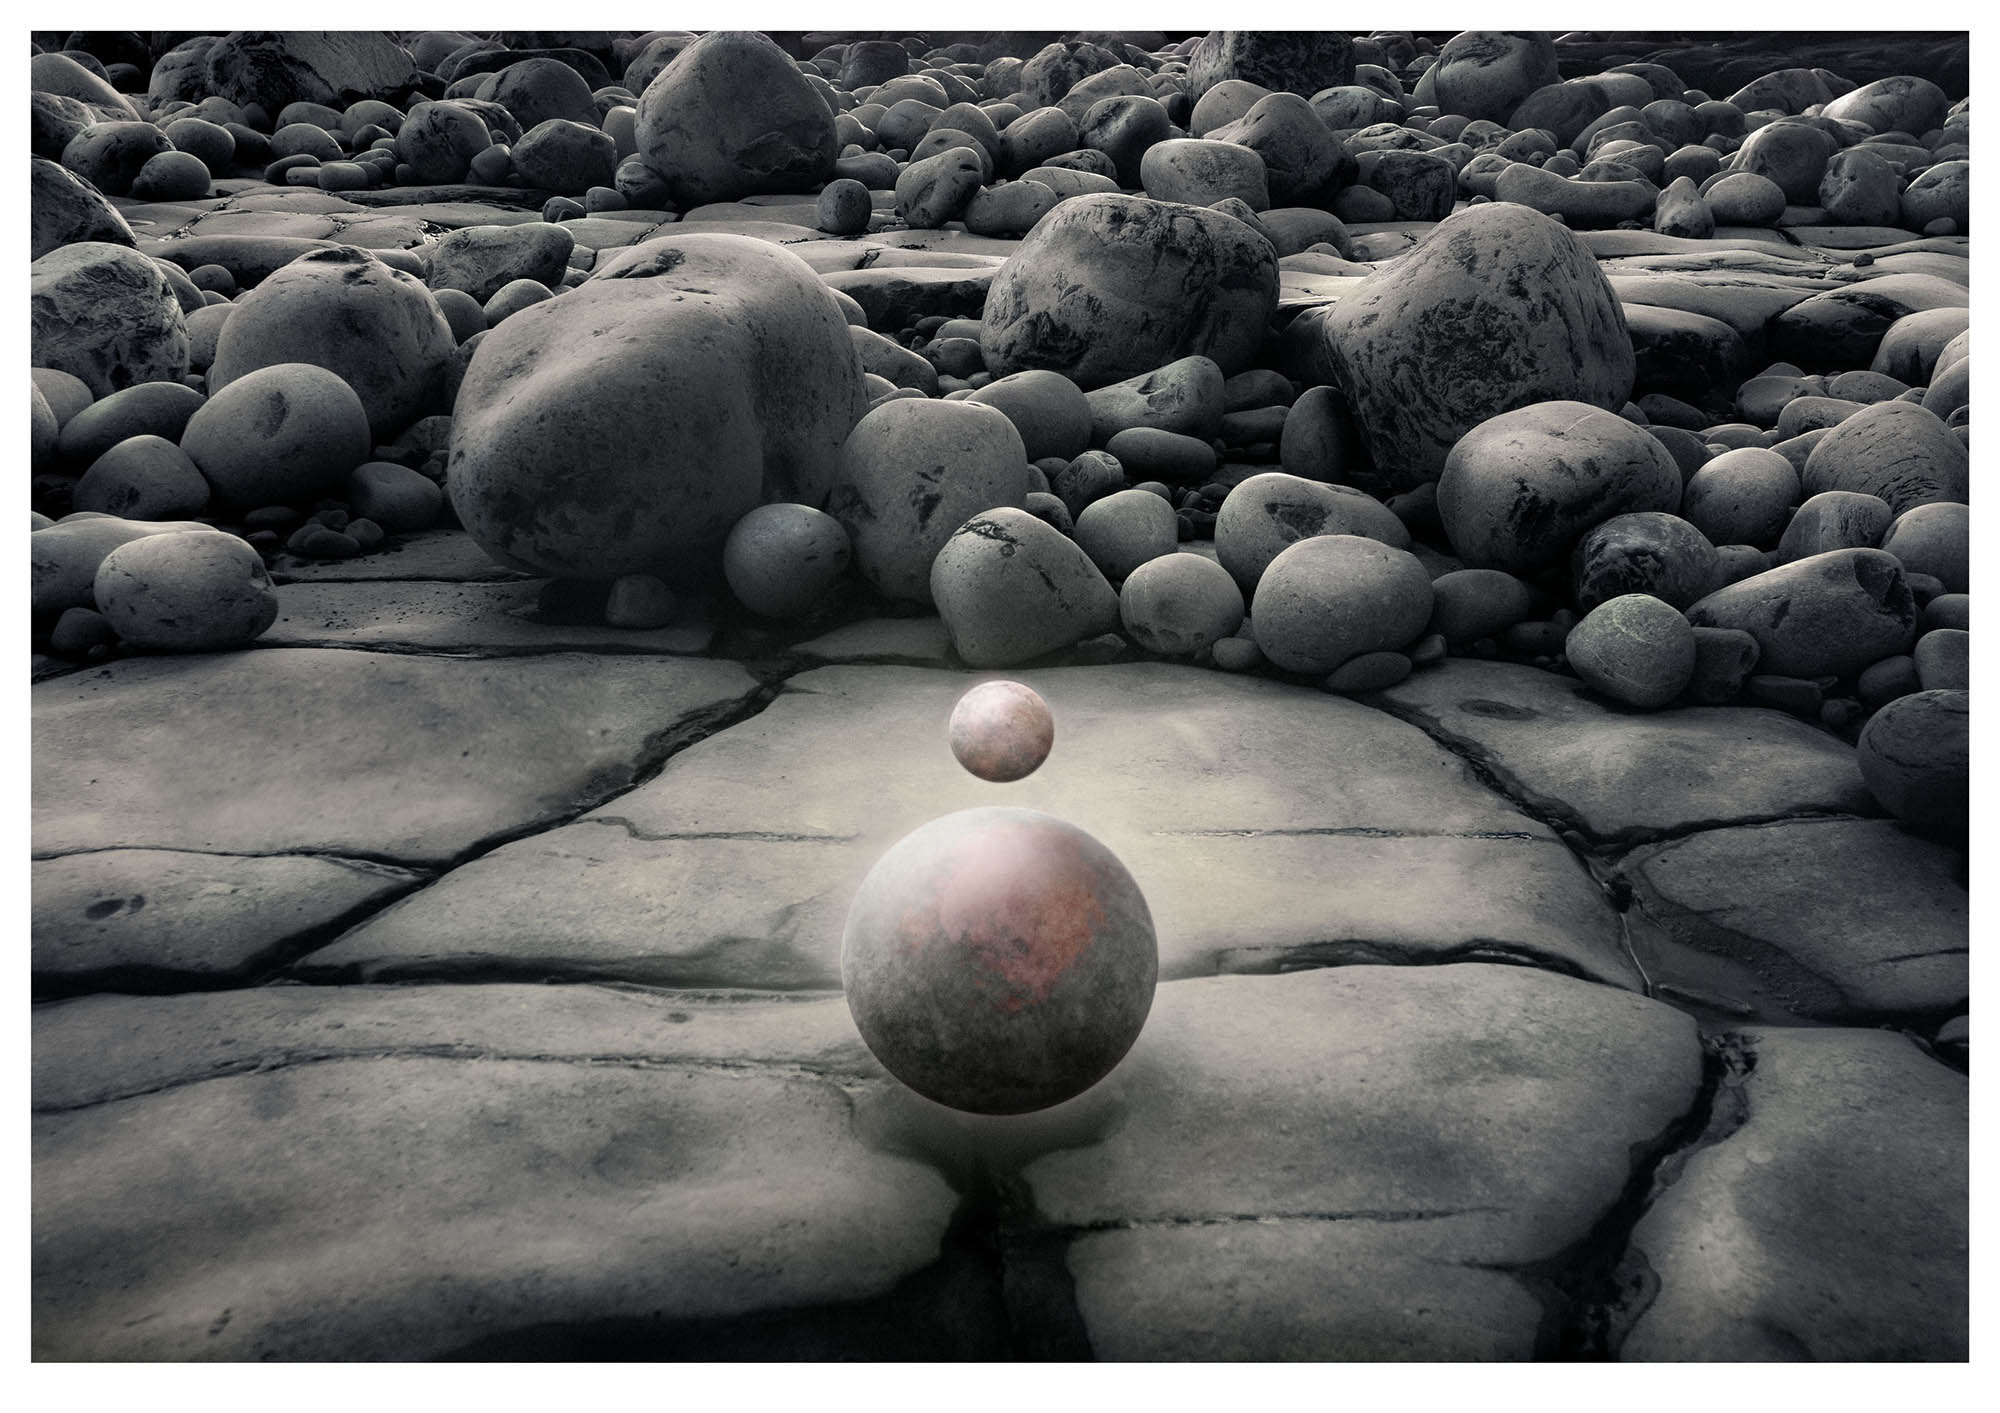 Jurassic boulders form background for small planet floating above larger one in surreal fantasy universe photograph